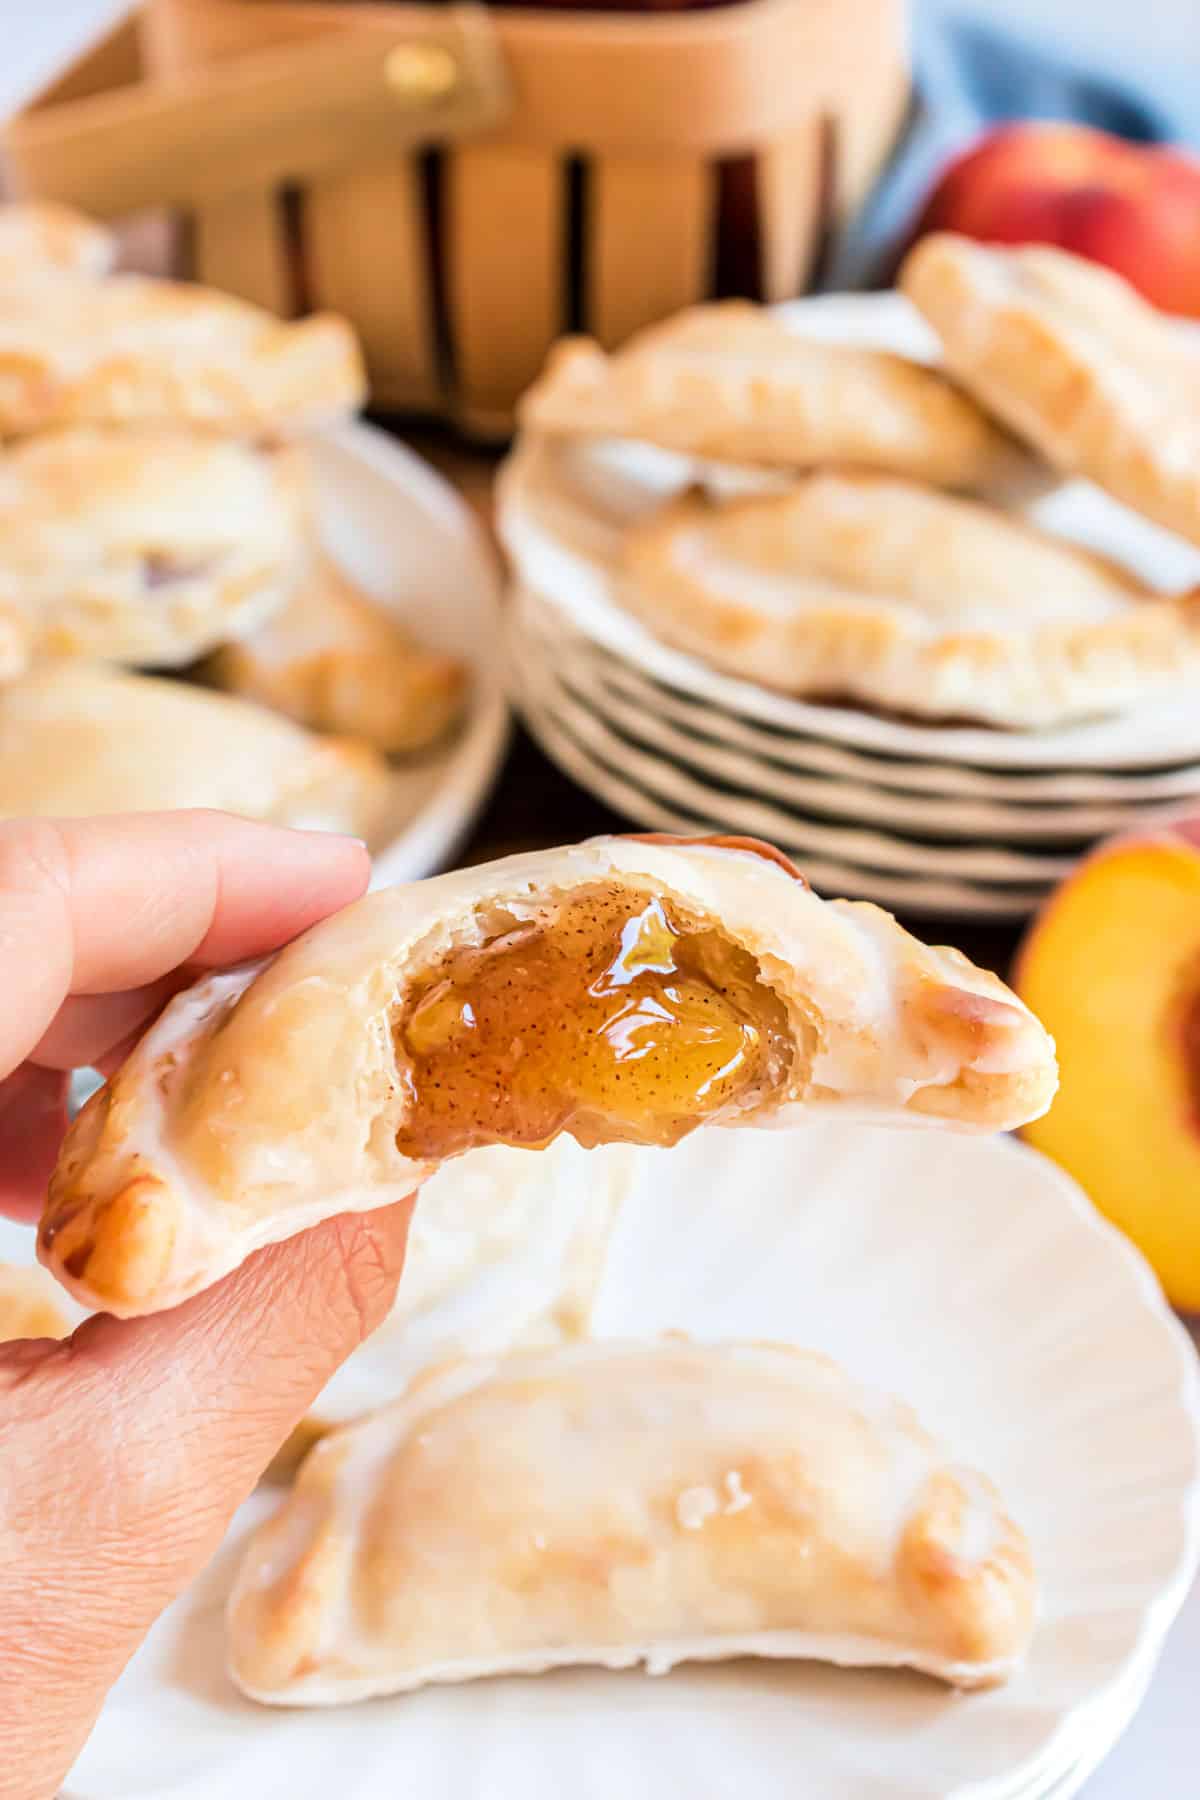 Peach hand pie with a bite taken out.